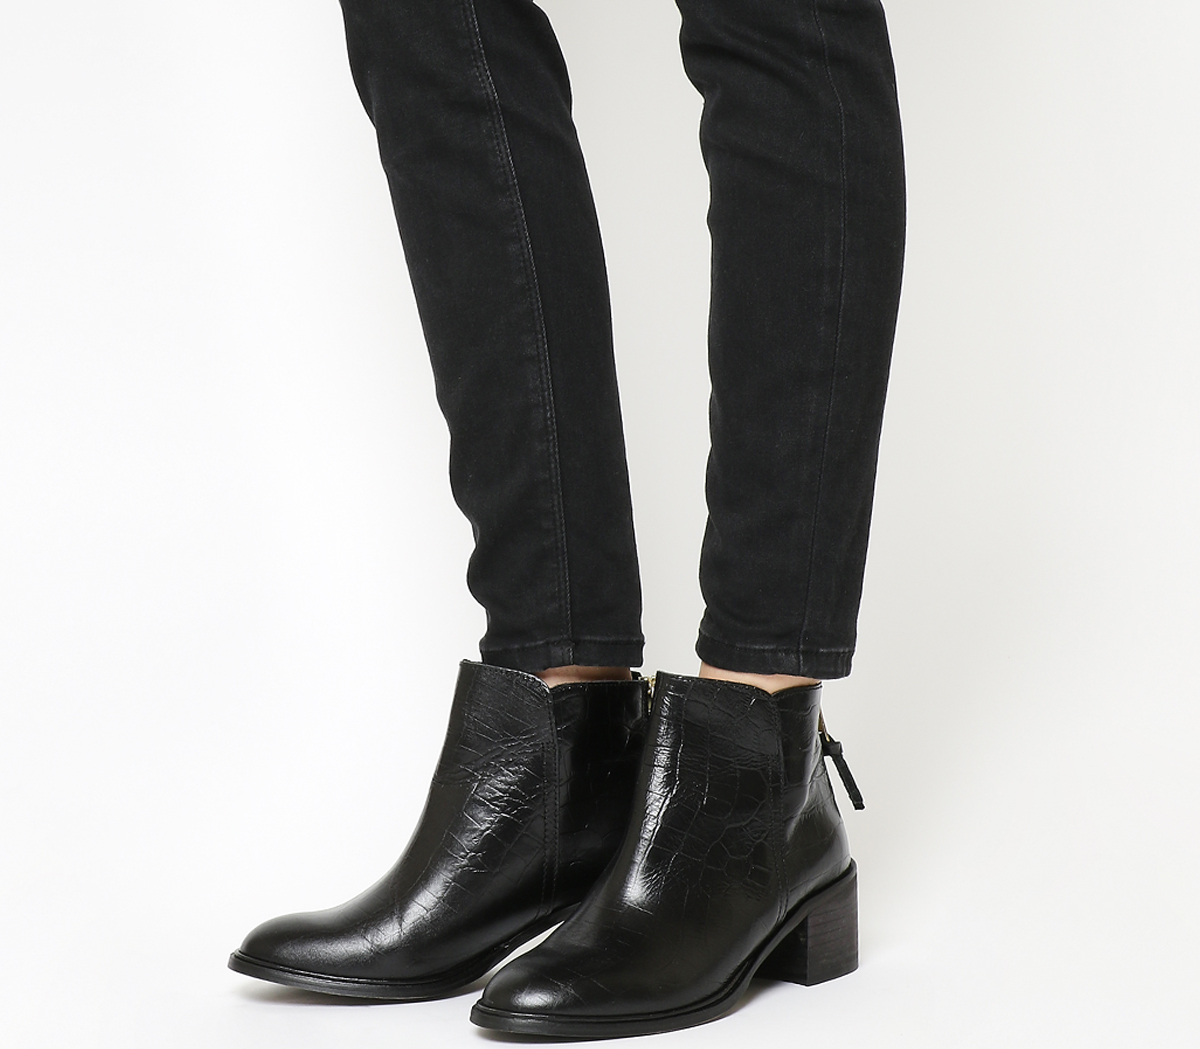 black leather ankle boots with zip